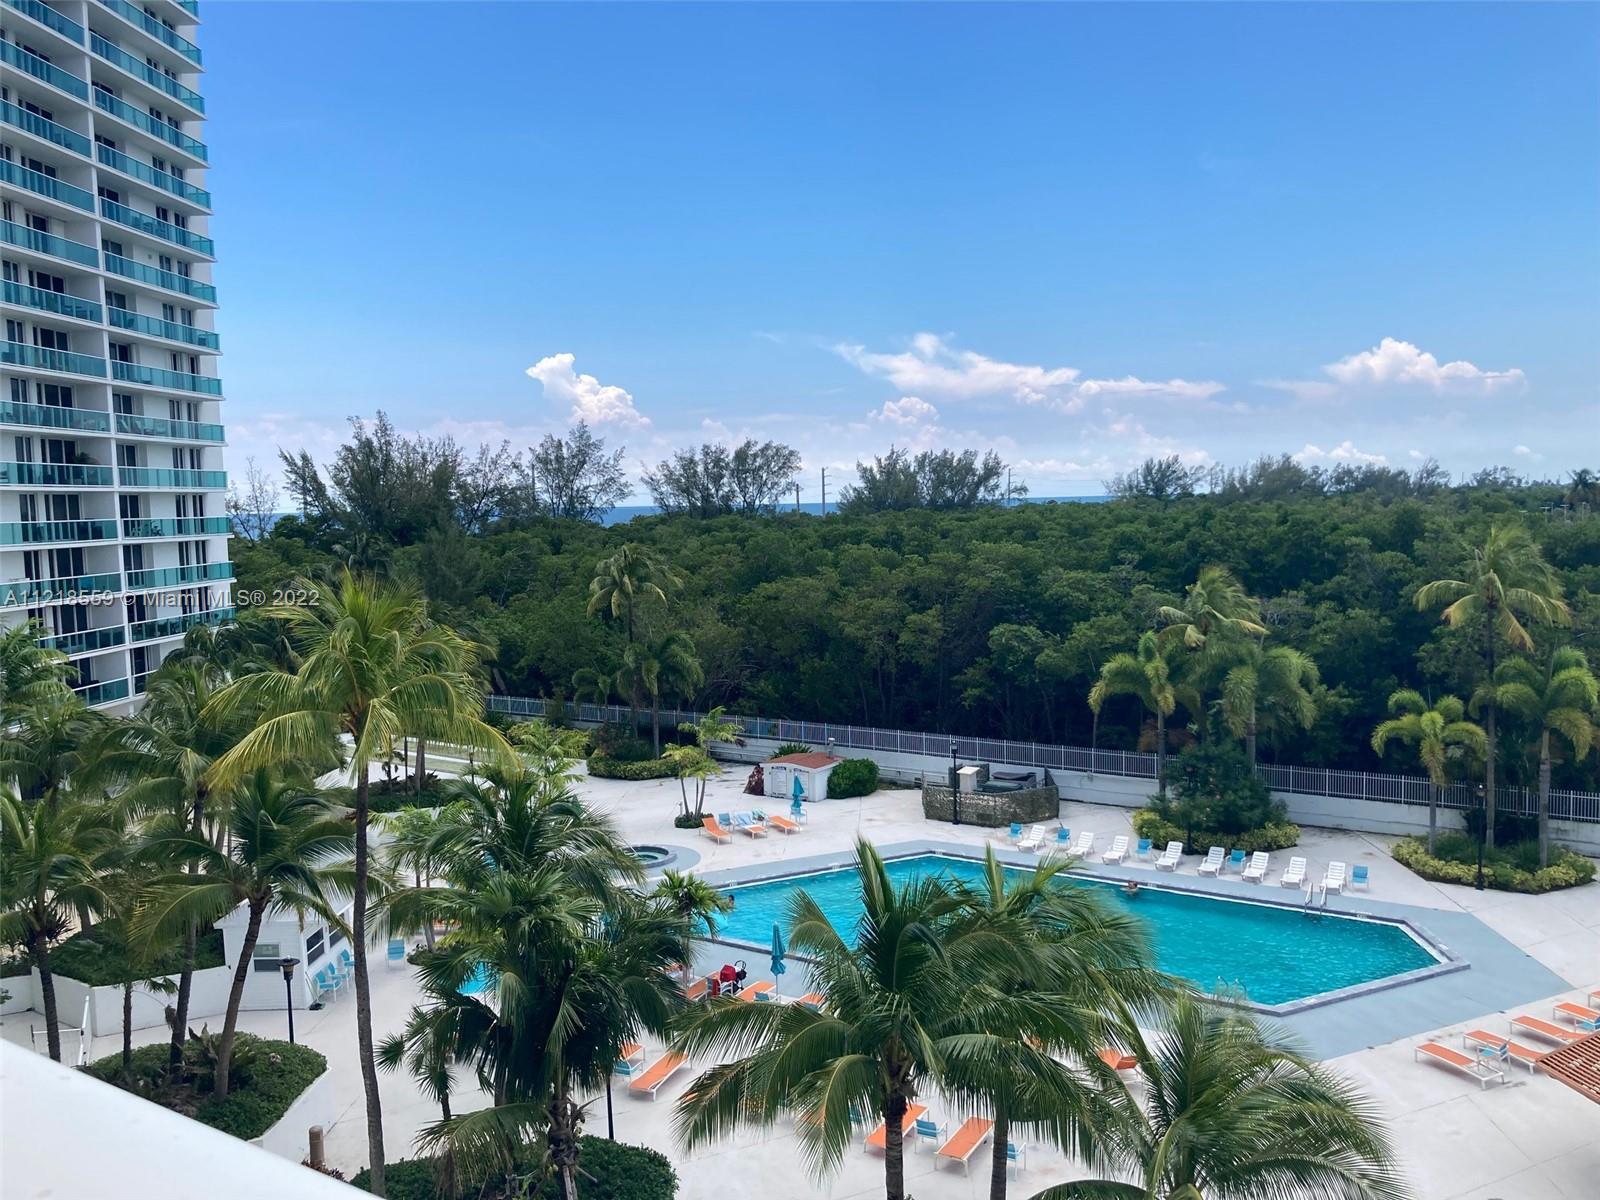 Spacious two bedroom / two bathroom with spectacular SOUTH views to the pool area, Intracoastal and 